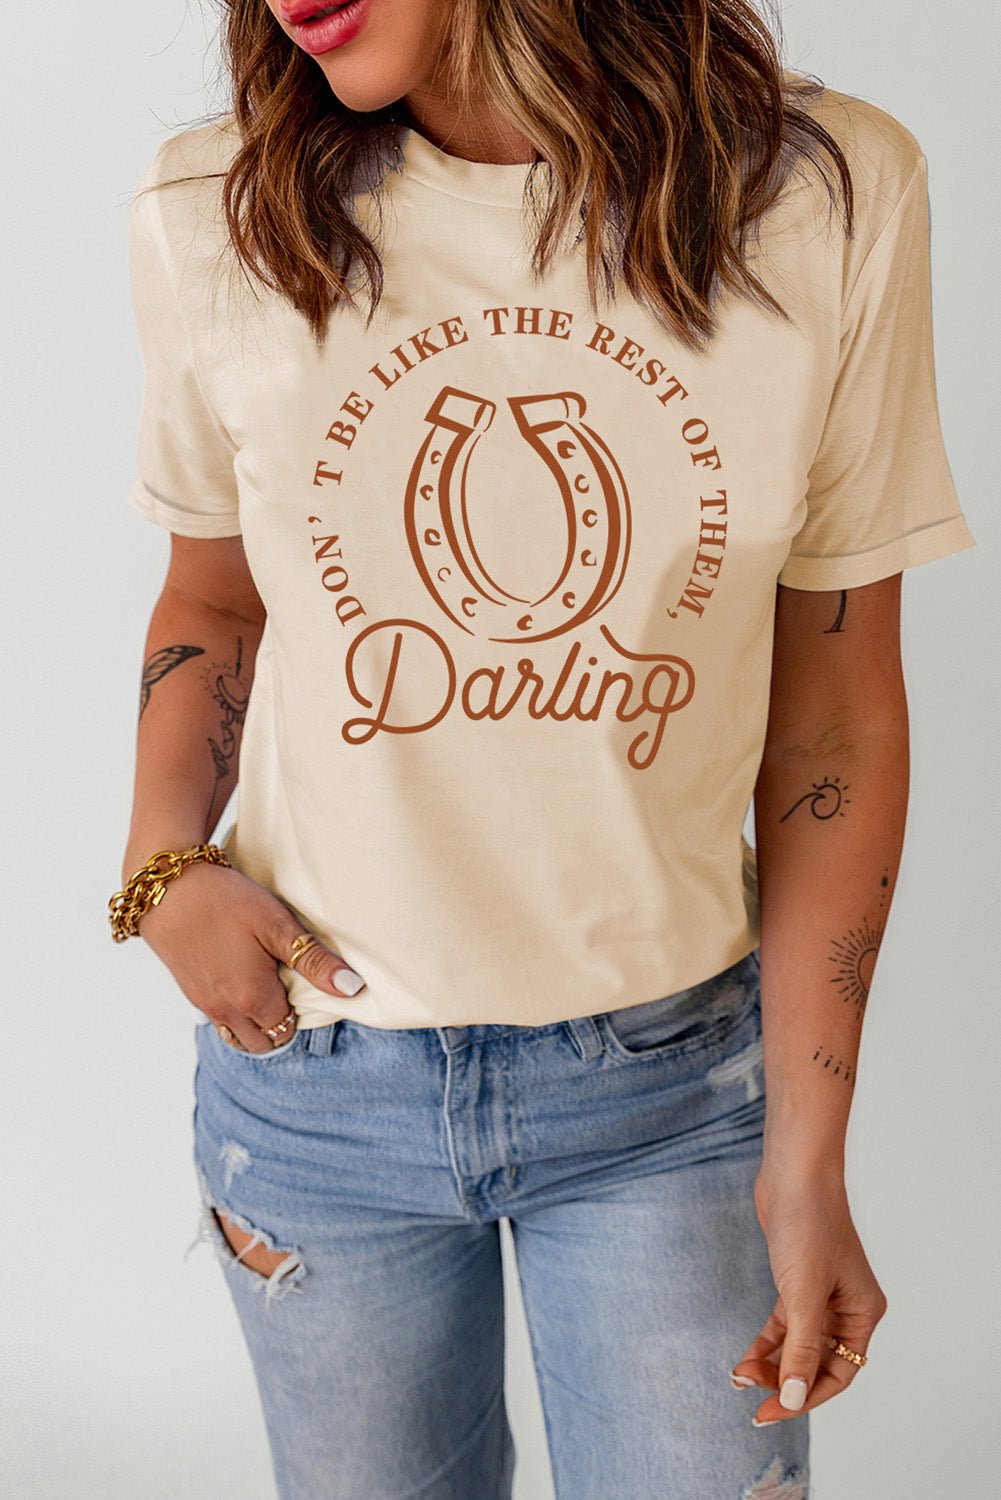 Indulge in Romance with our Slogan Graphic Cuffed Sleeve Tee Shirt - The Perfect Choice for Making a Statement While Staying Comfortable and Chic - Guy Christopher